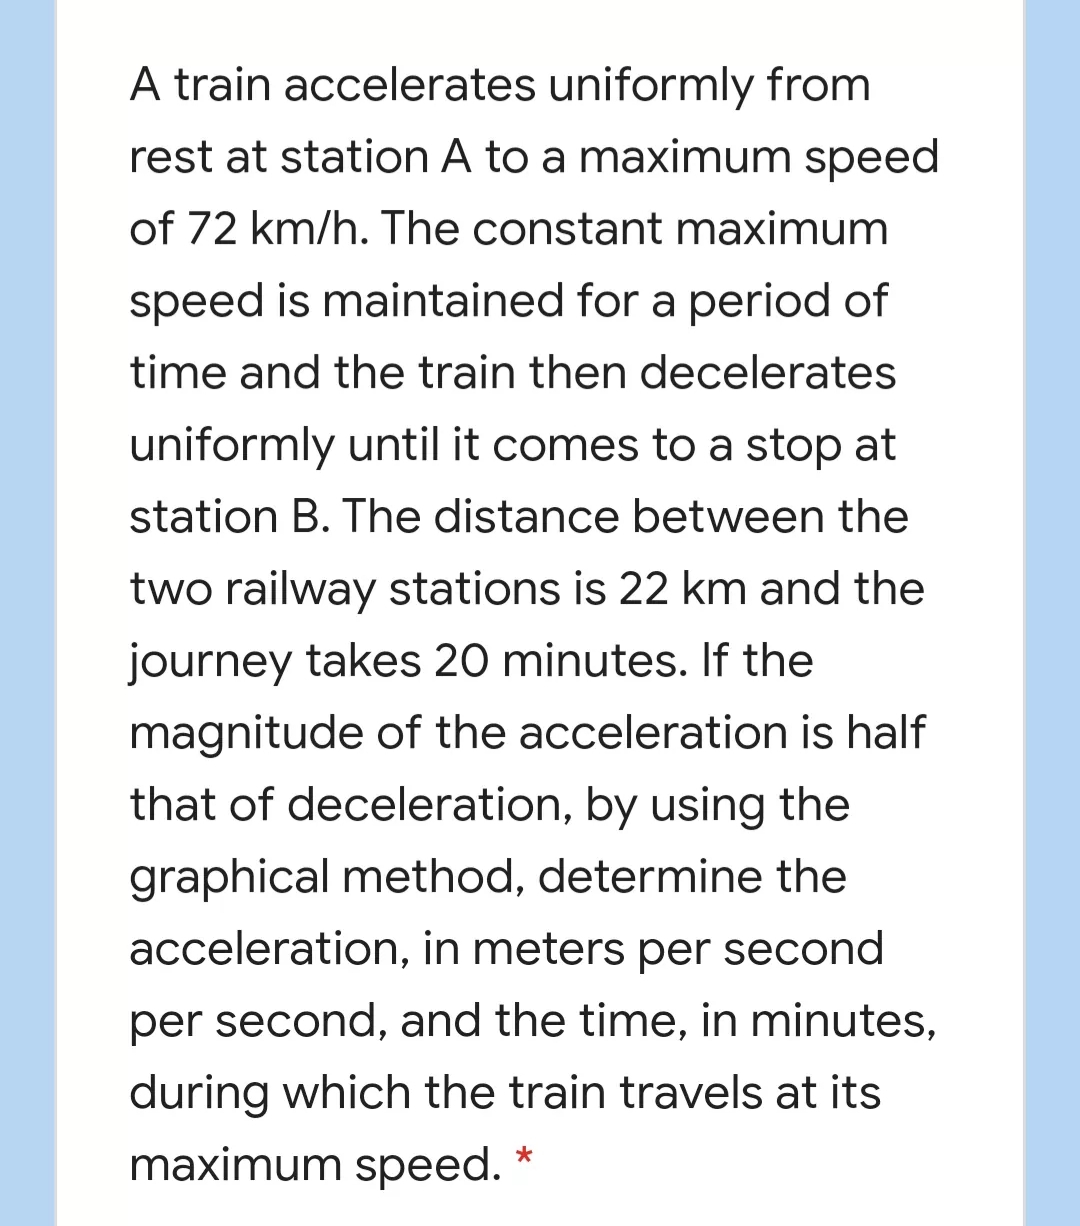 A train accelerates uniformly from
rest at station A to a maximum speed
of 72 km/h. The constant maximum
speed is maintained for a period of
time and the train then decelerates
uniformly until it comes to a stop at
station B. The distance between the
two railway stations is 22 km and the
journey takes 20 minutes. If the
magnitude of the acceleration is half
that of deceleration, by using the
graphical method, determine the
acceleration, in meters per second
per second, and the time, in minutes,
during which the train travels at its
maximum speed.
